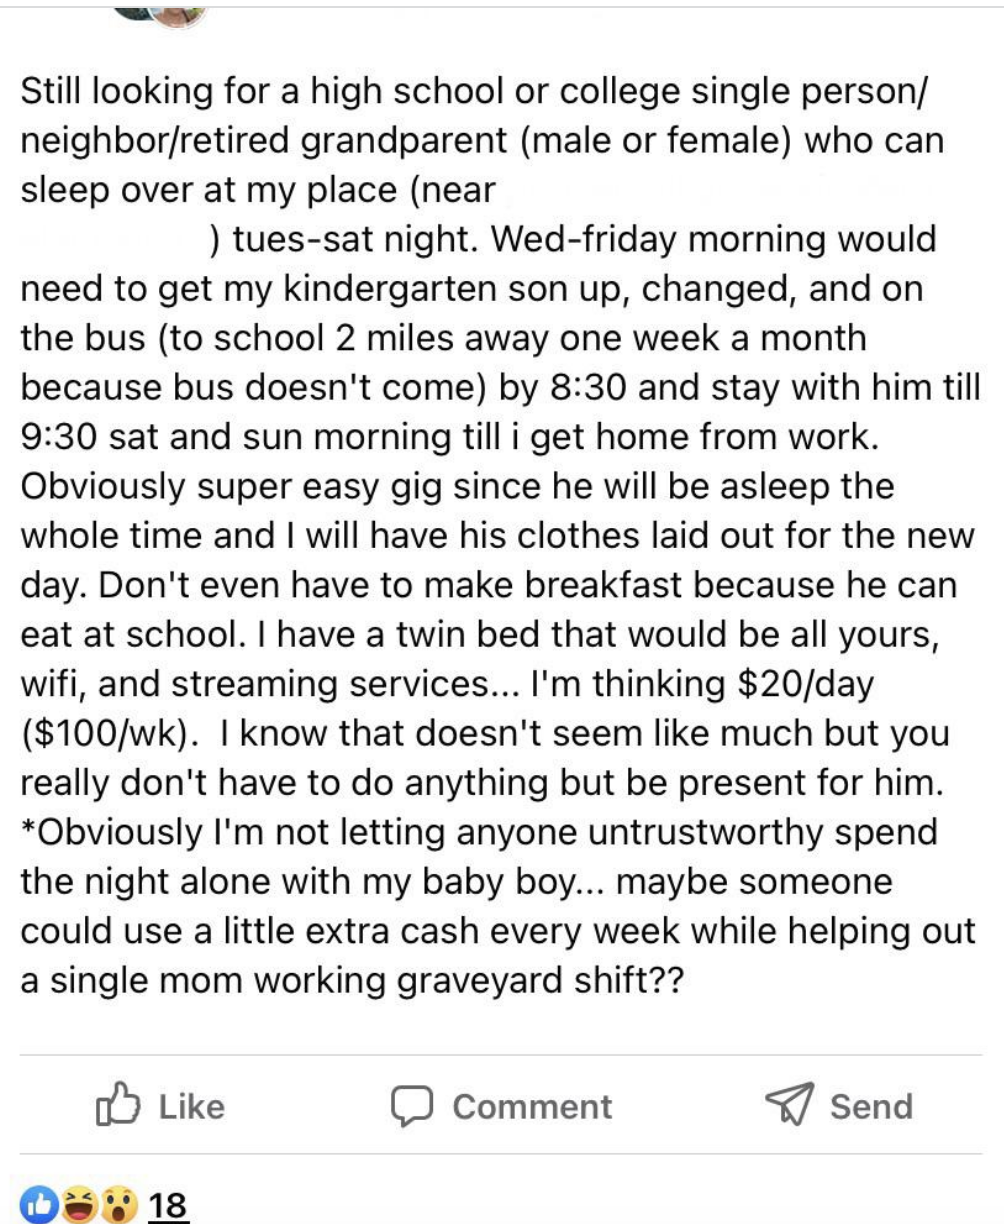 Mom is offering $20/day, $100/wk for someone to sleep at their house Tues-Sat and get their kid up Wed-Fri for school and stay with him till 9:30 am Sat and Sun; she&#x27;s also offering WiFi and a twin bed